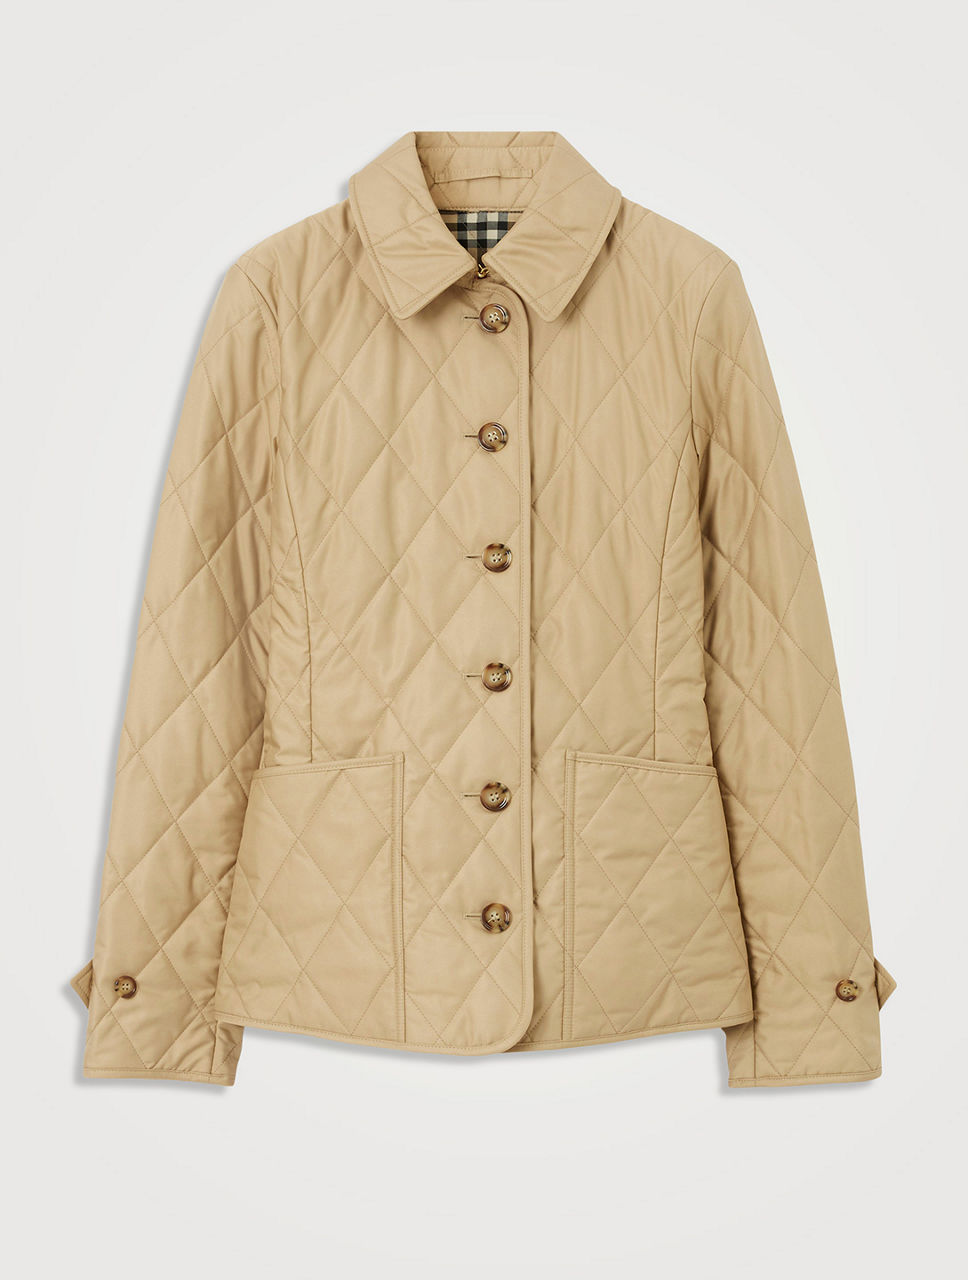 BURBERRY Diamond Quilted Thermoregulated Jacket | Holt Renfrew